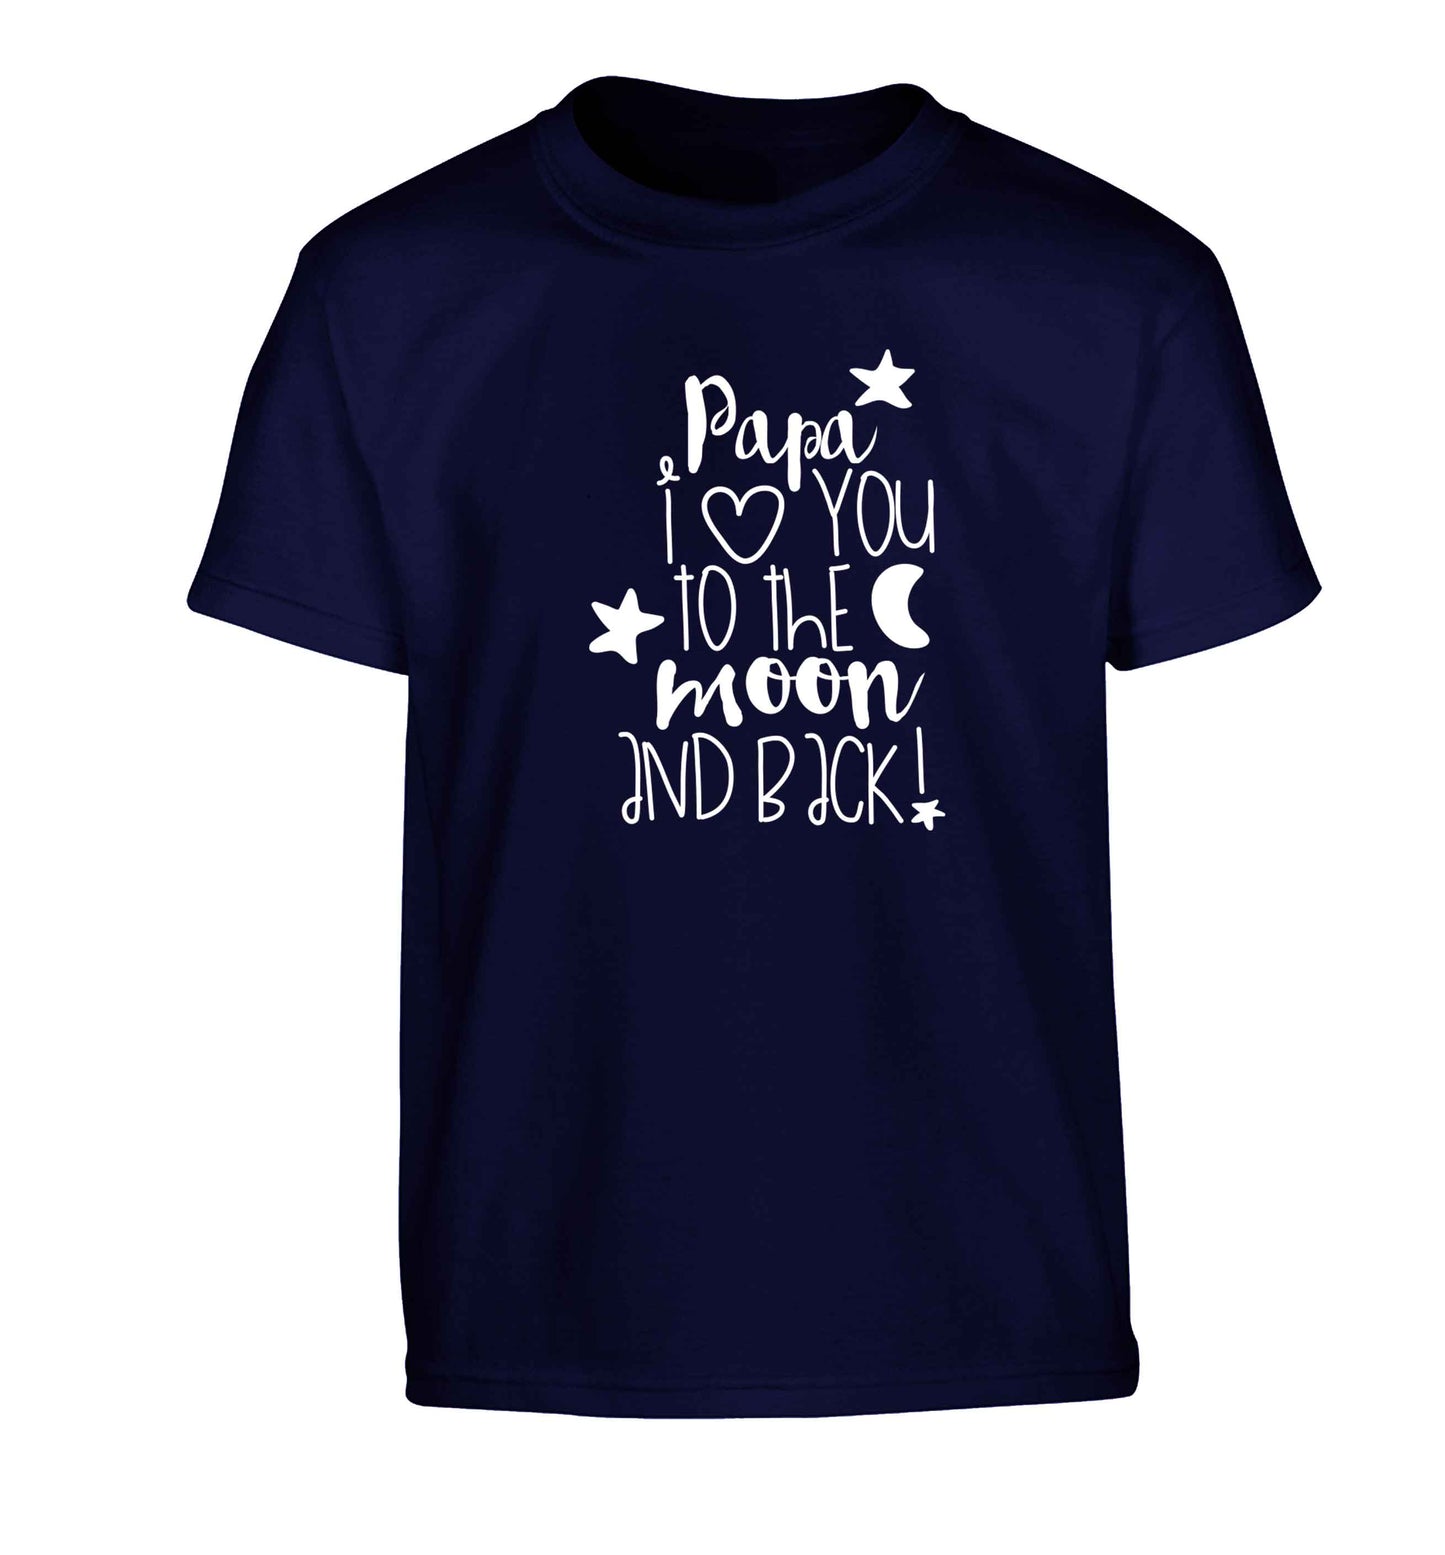 Papa I love you to the moon and back Children's navy Tshirt 12-13 Years